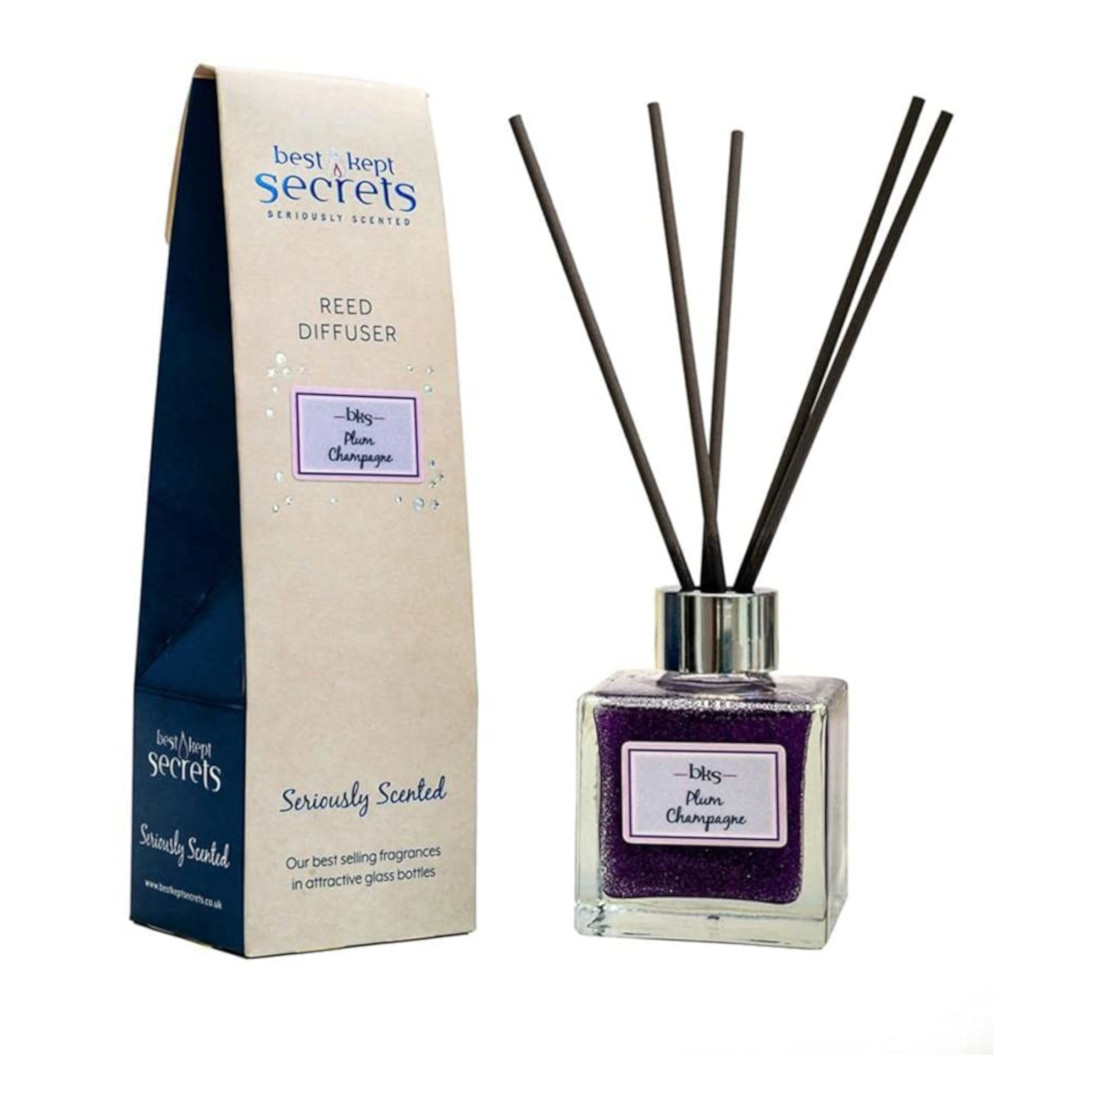 Best Kept Secrets Plum Champagne Sparkly Reed Diffuser 100ml